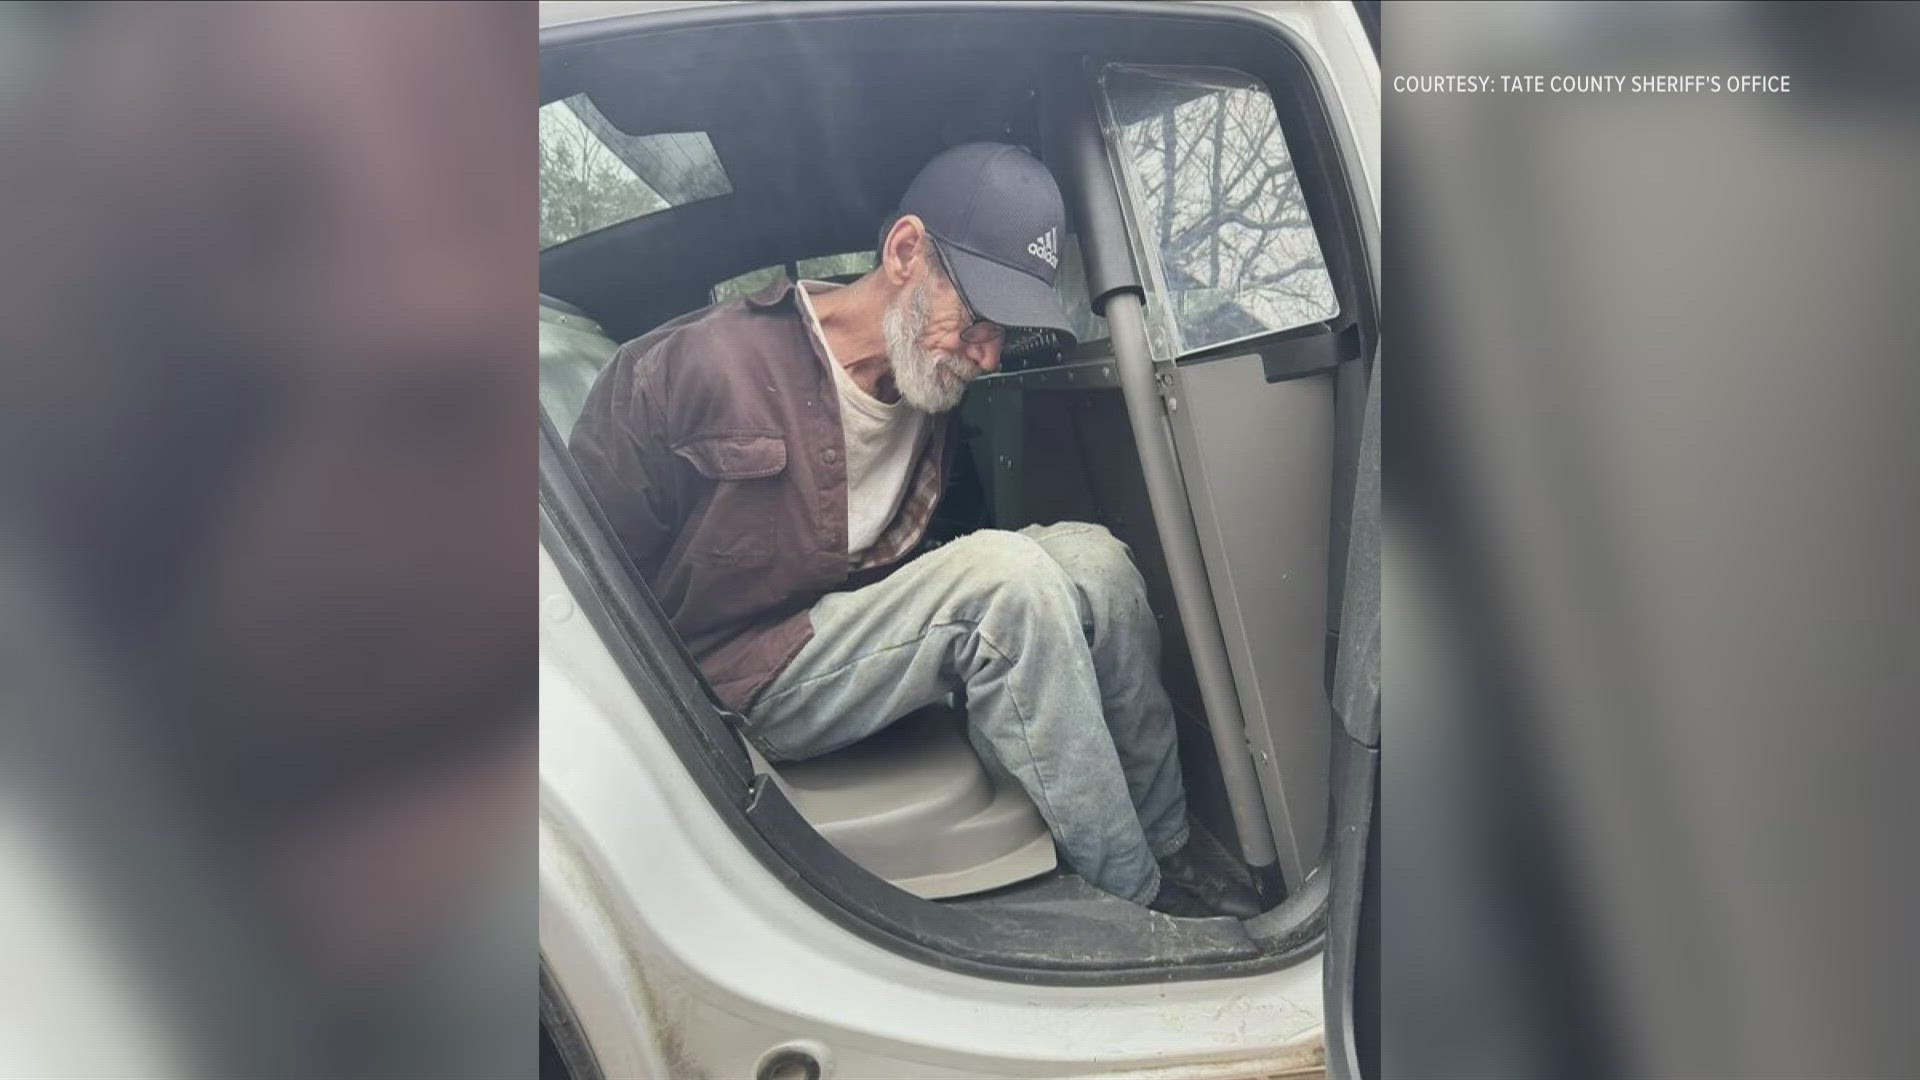 The Tate County Sheriff's Office was looking for a 60-year-old man they say assaulted an officer, but on Sunday the Mississippi Department of Public Safety said.